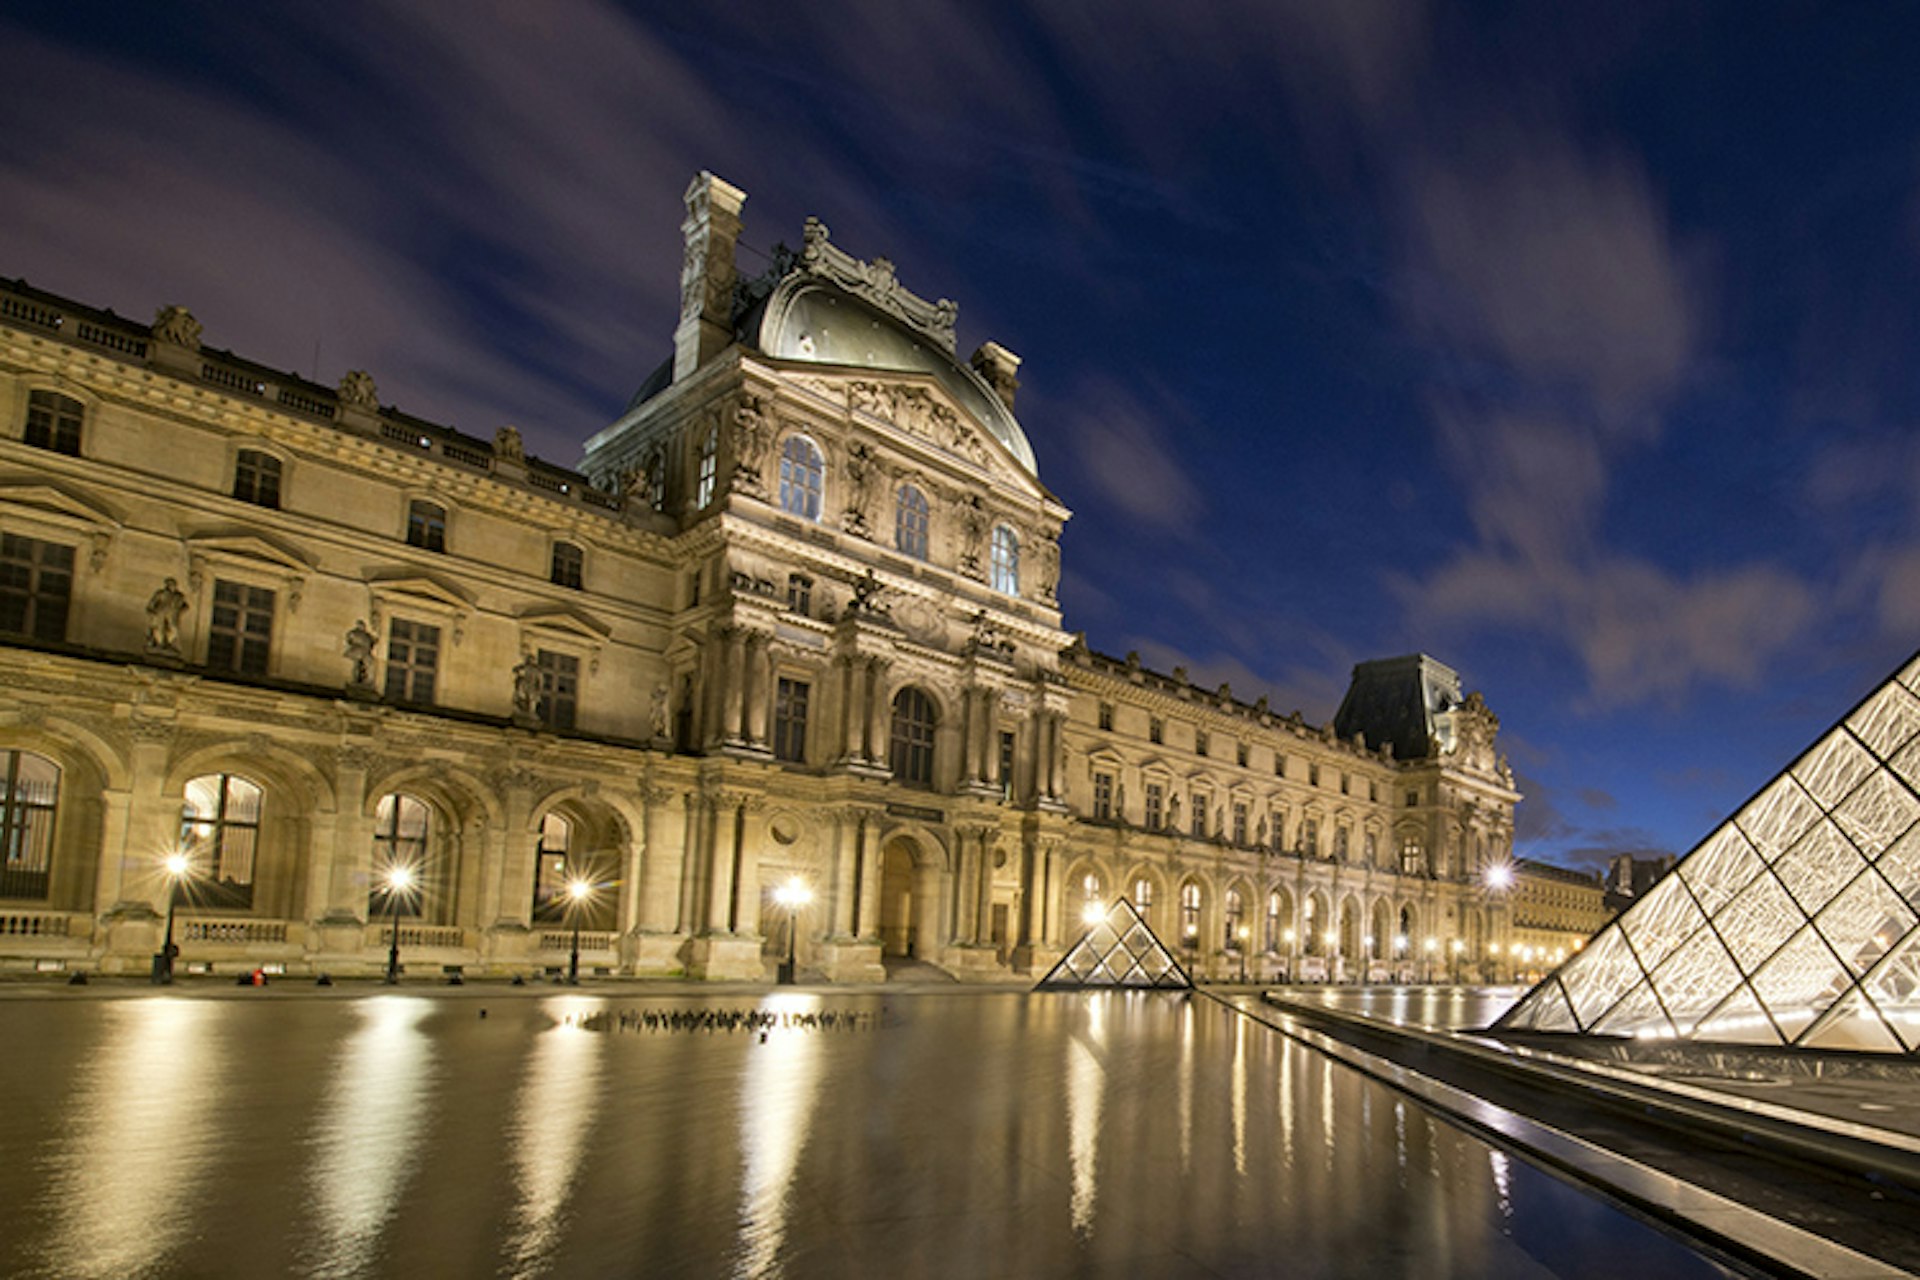 Central courtyard of Louvre at dusk.